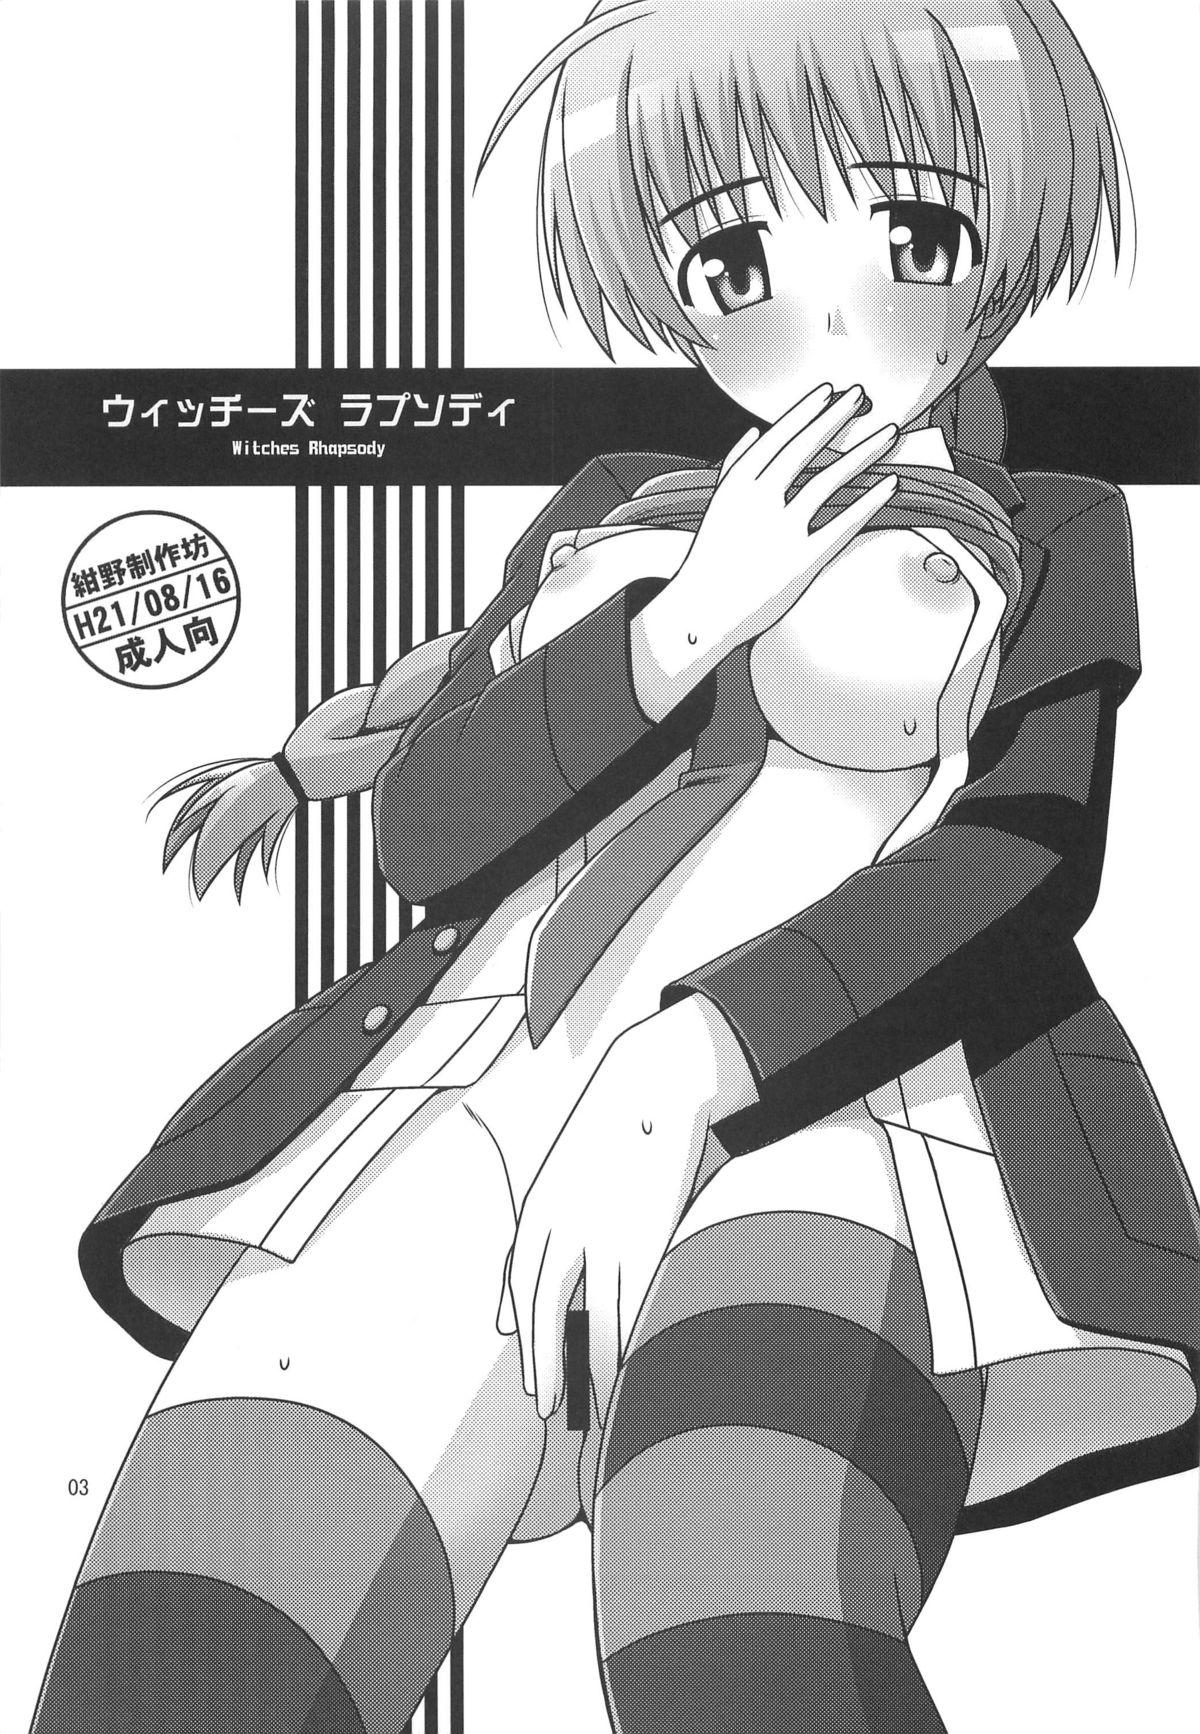 Close Witches Rhapsody - Strike witches Ebony - Page 2